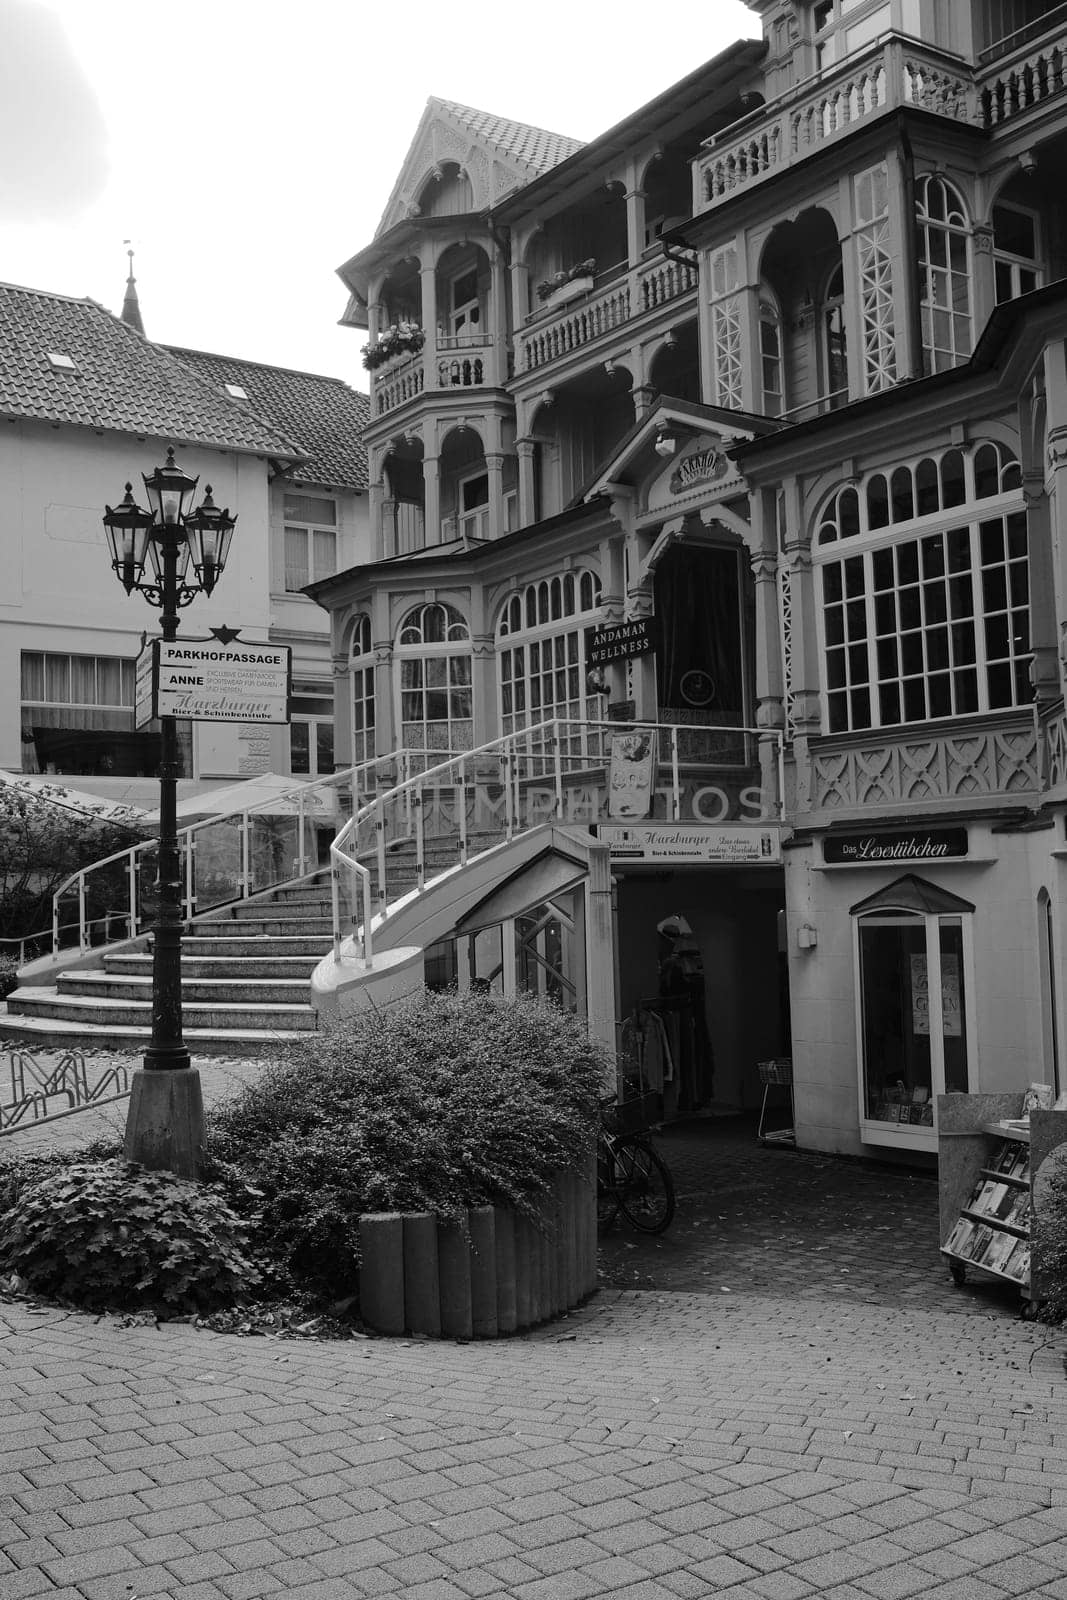 Vertical grayscale shot of a decorative classic villa in Bad Harzburg, Germany